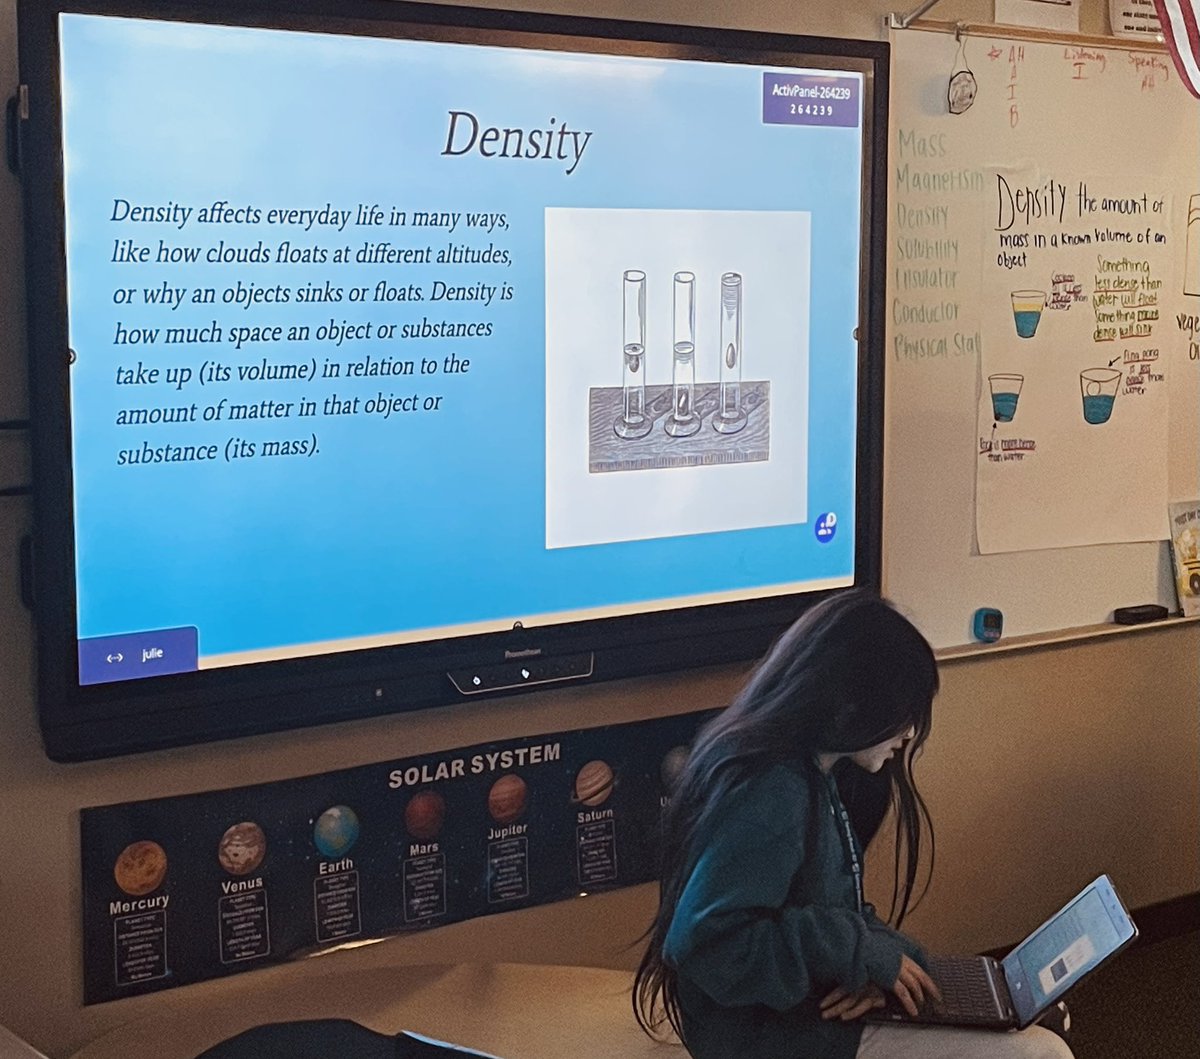 Our 5th grade scholars were able to articulate their knowledge through their presentations in science class. They had to utilize research skills, put together a presentation and present it to teach their peers. @SBISD @SBISDScience #ScholarsOwningExcellence